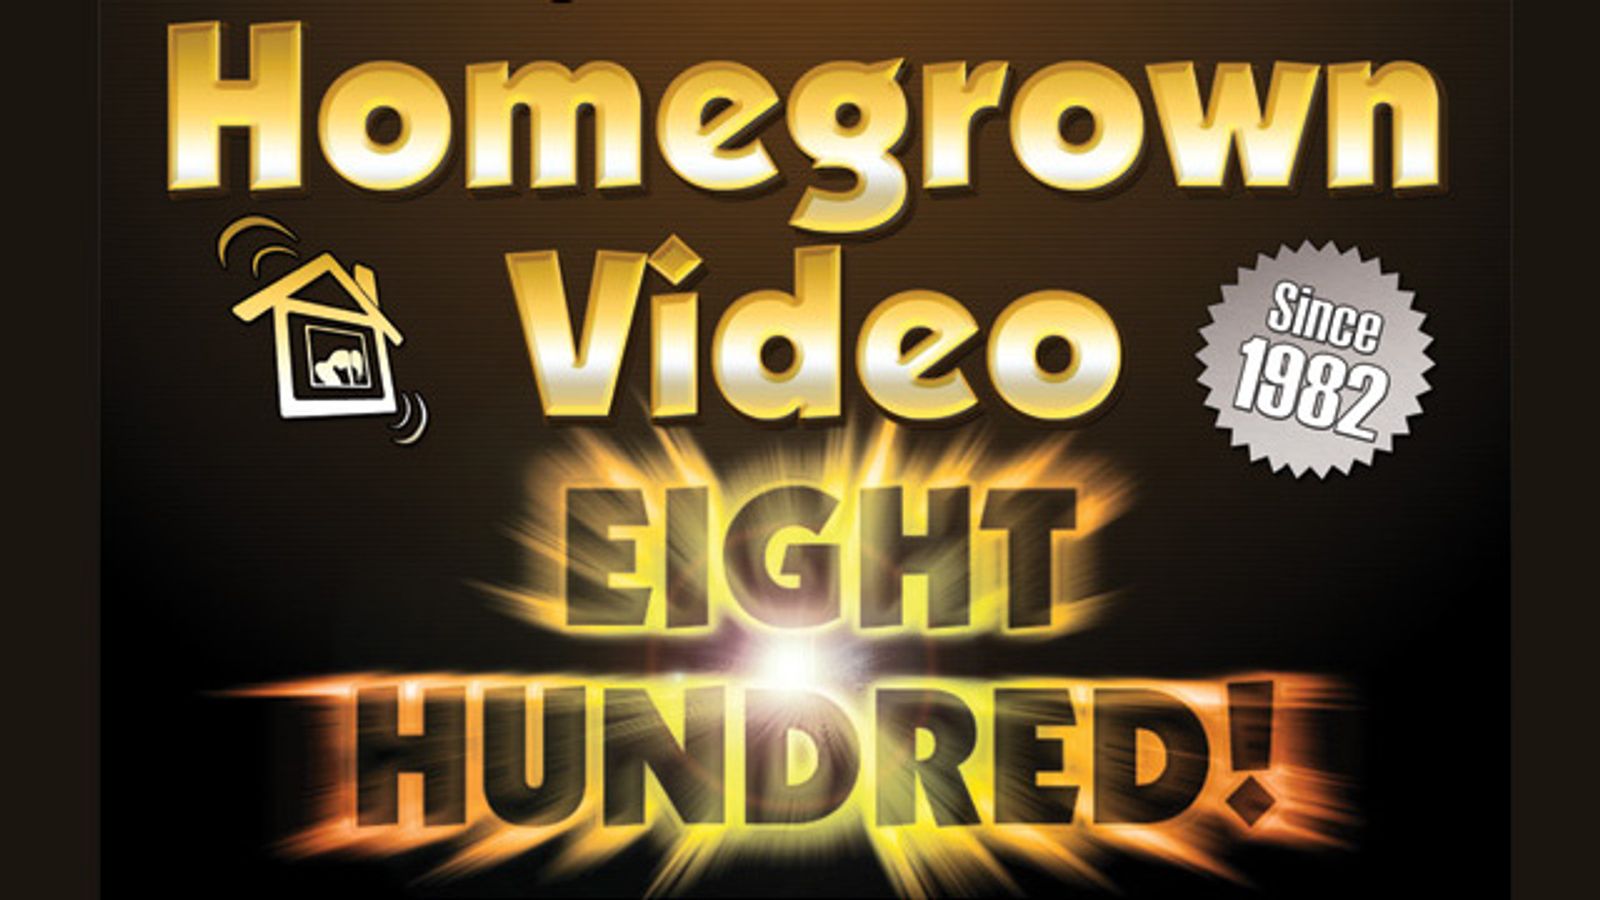 Homegrown Video Releases 800th Volume in Signature Series